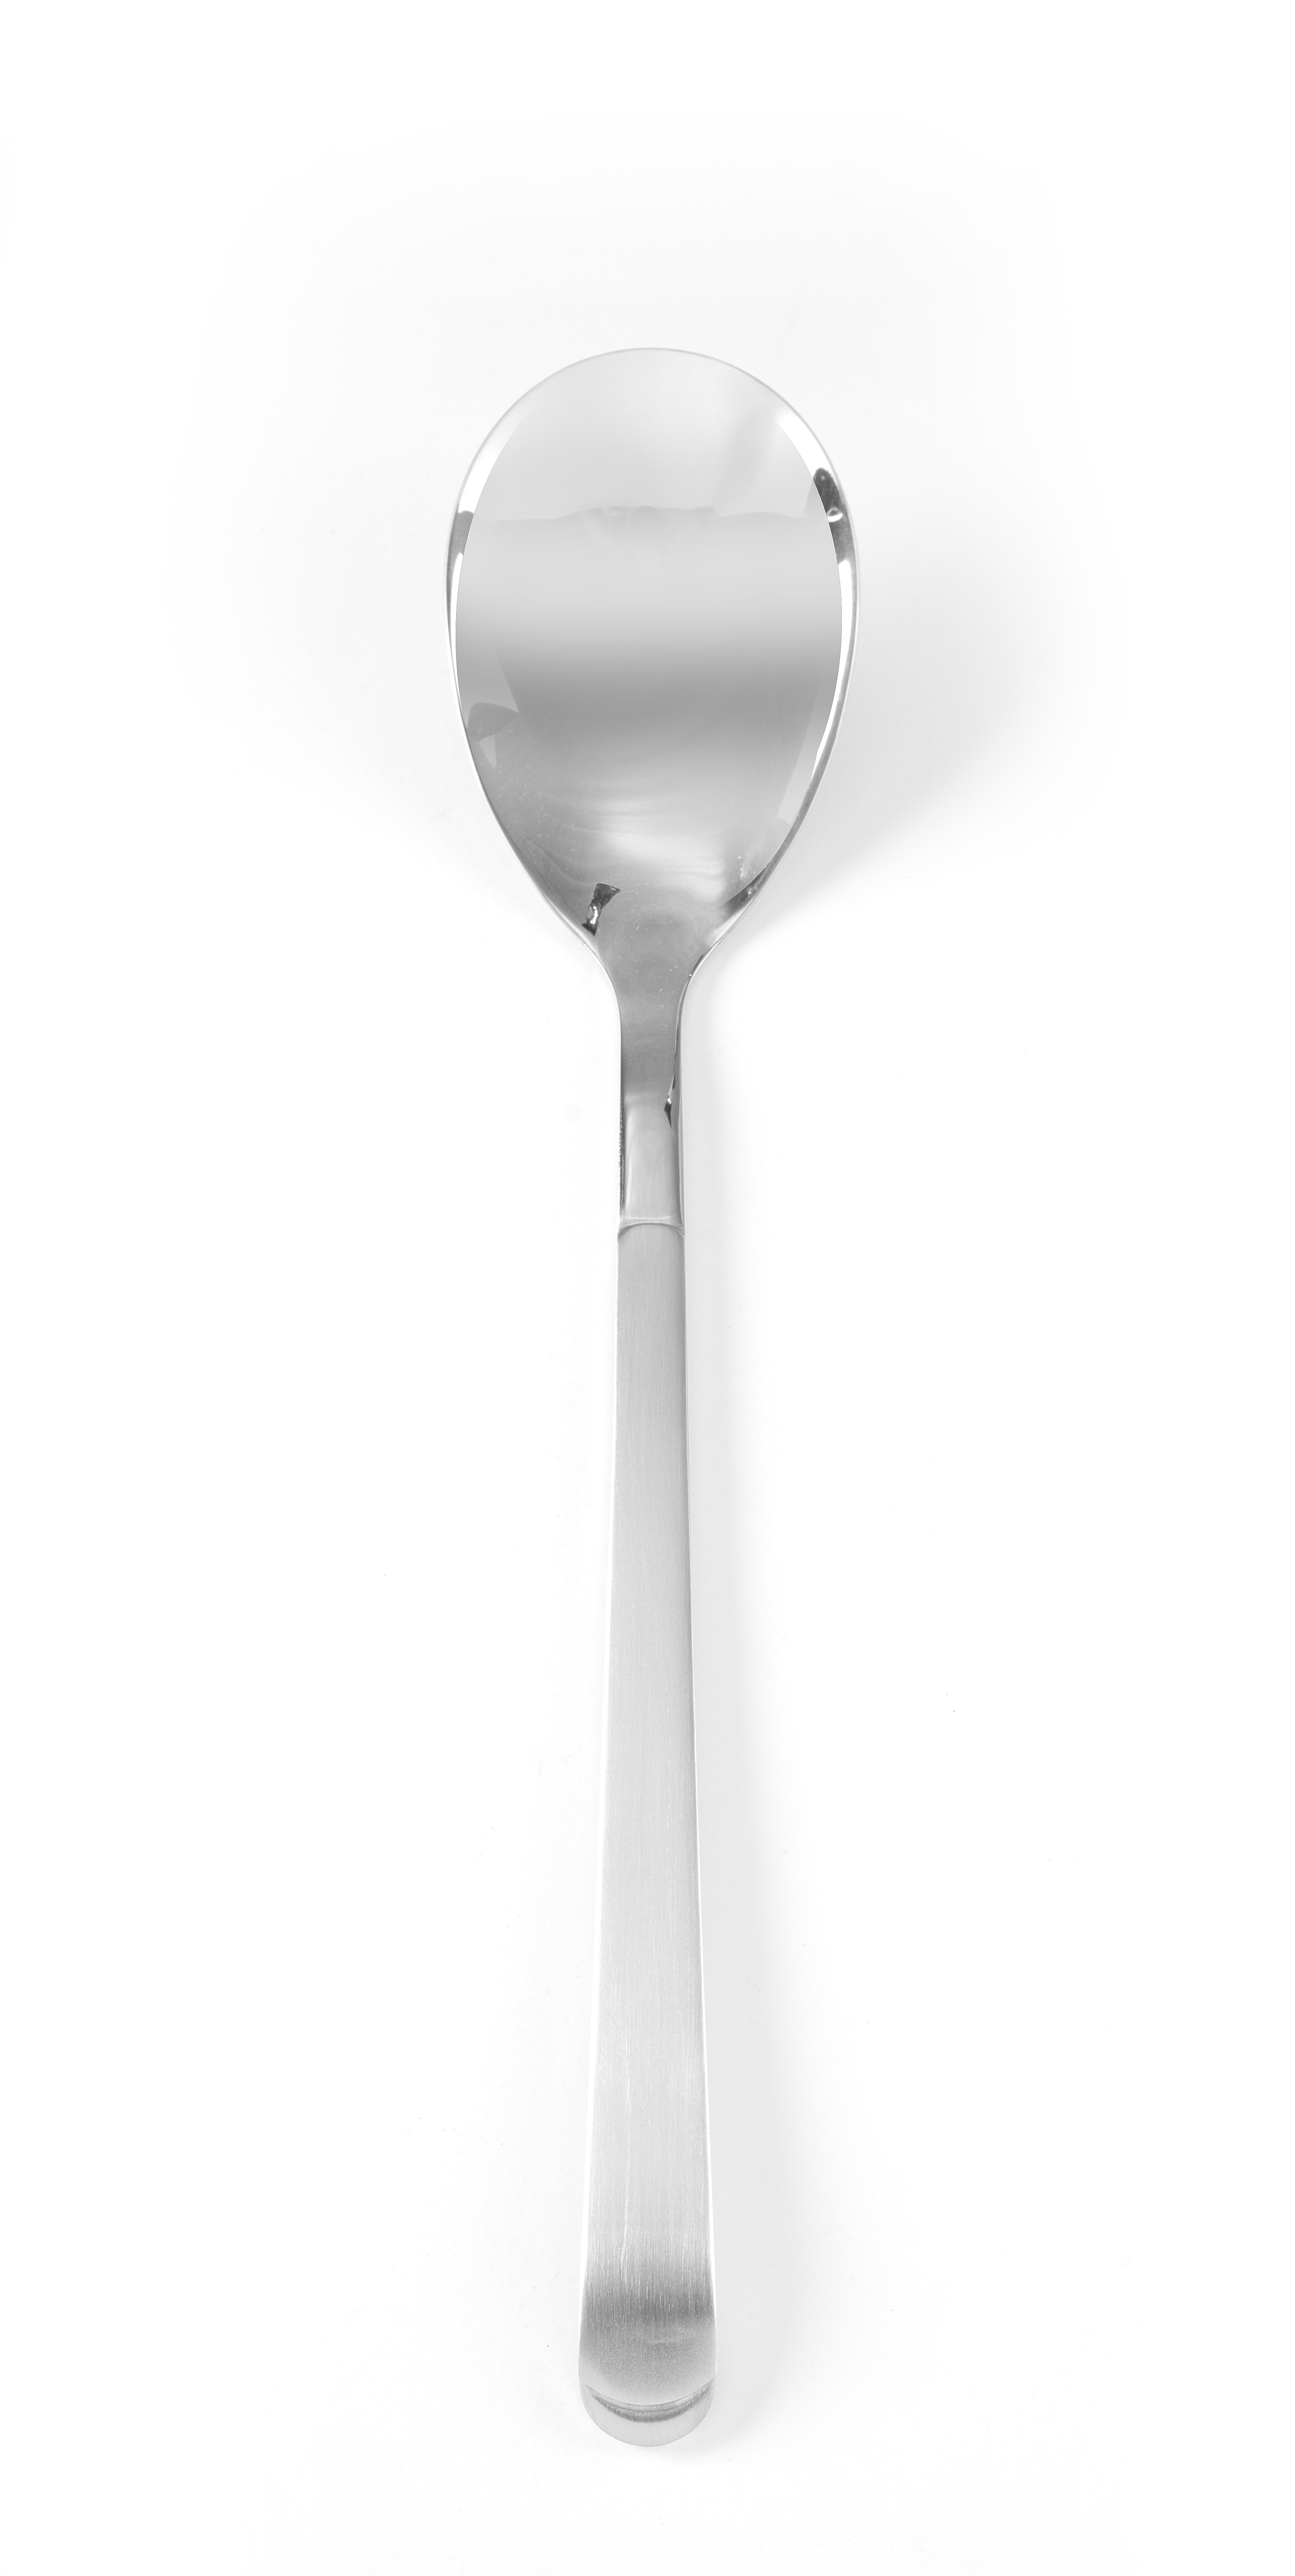 Dishwasher Safe 8 3/4 Inch Stainless Steel Serving Spoons Mirror Finish Includes 3 Serving Spoons and 3 Slotted Serving Spoons for Buffet Banquet Kitchen Cooking Venyat 6 Pack Serving Spoons Set 